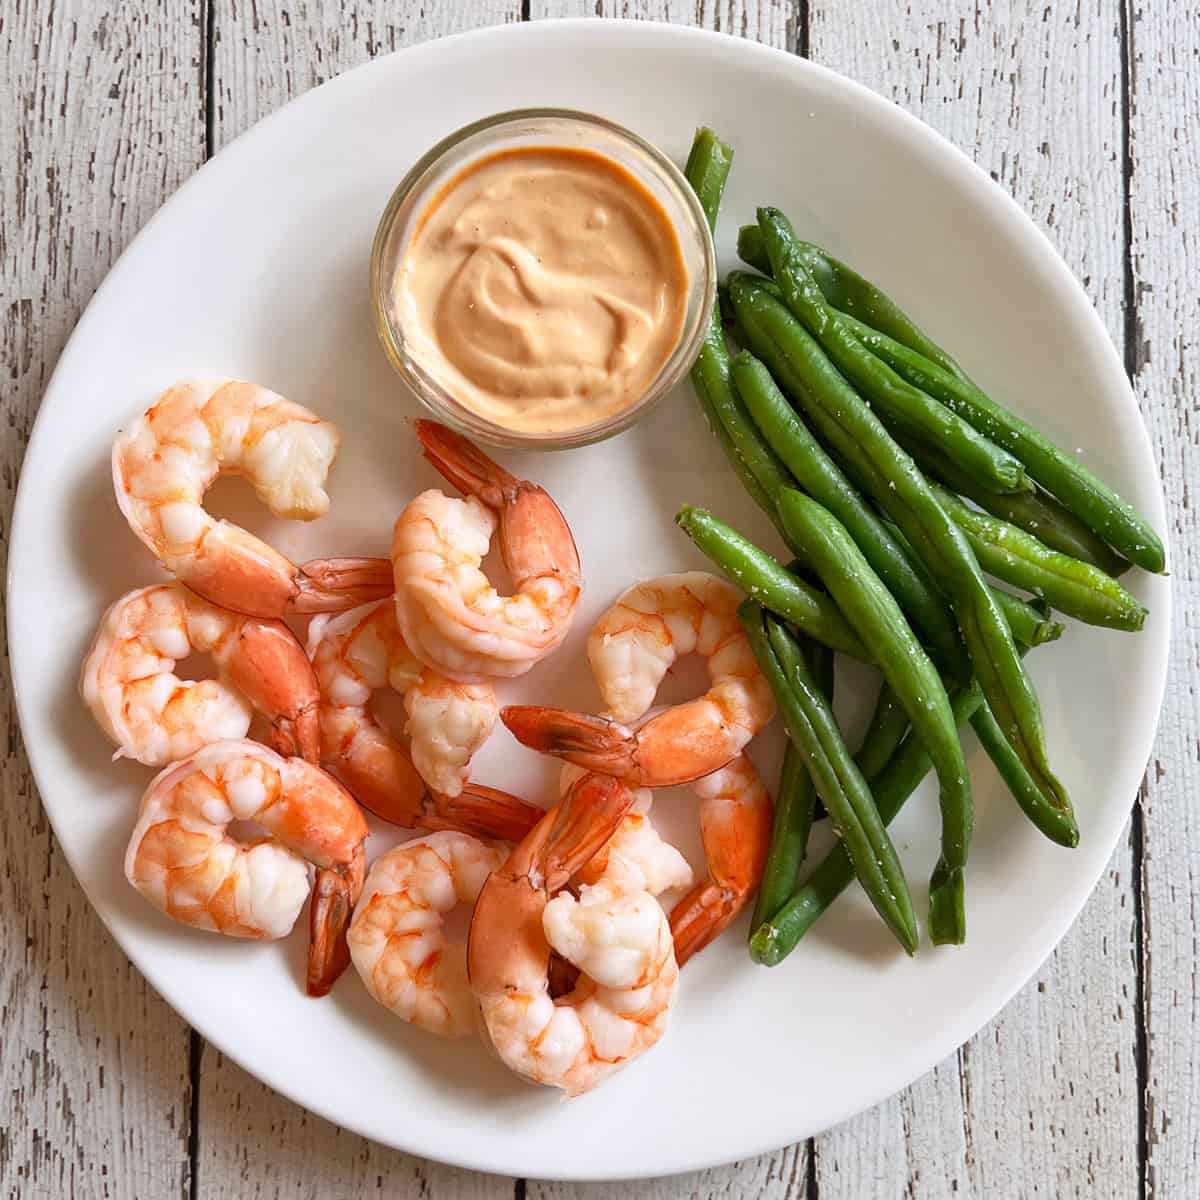 Boiled shrimp are served with sriracha mayo and green beans.